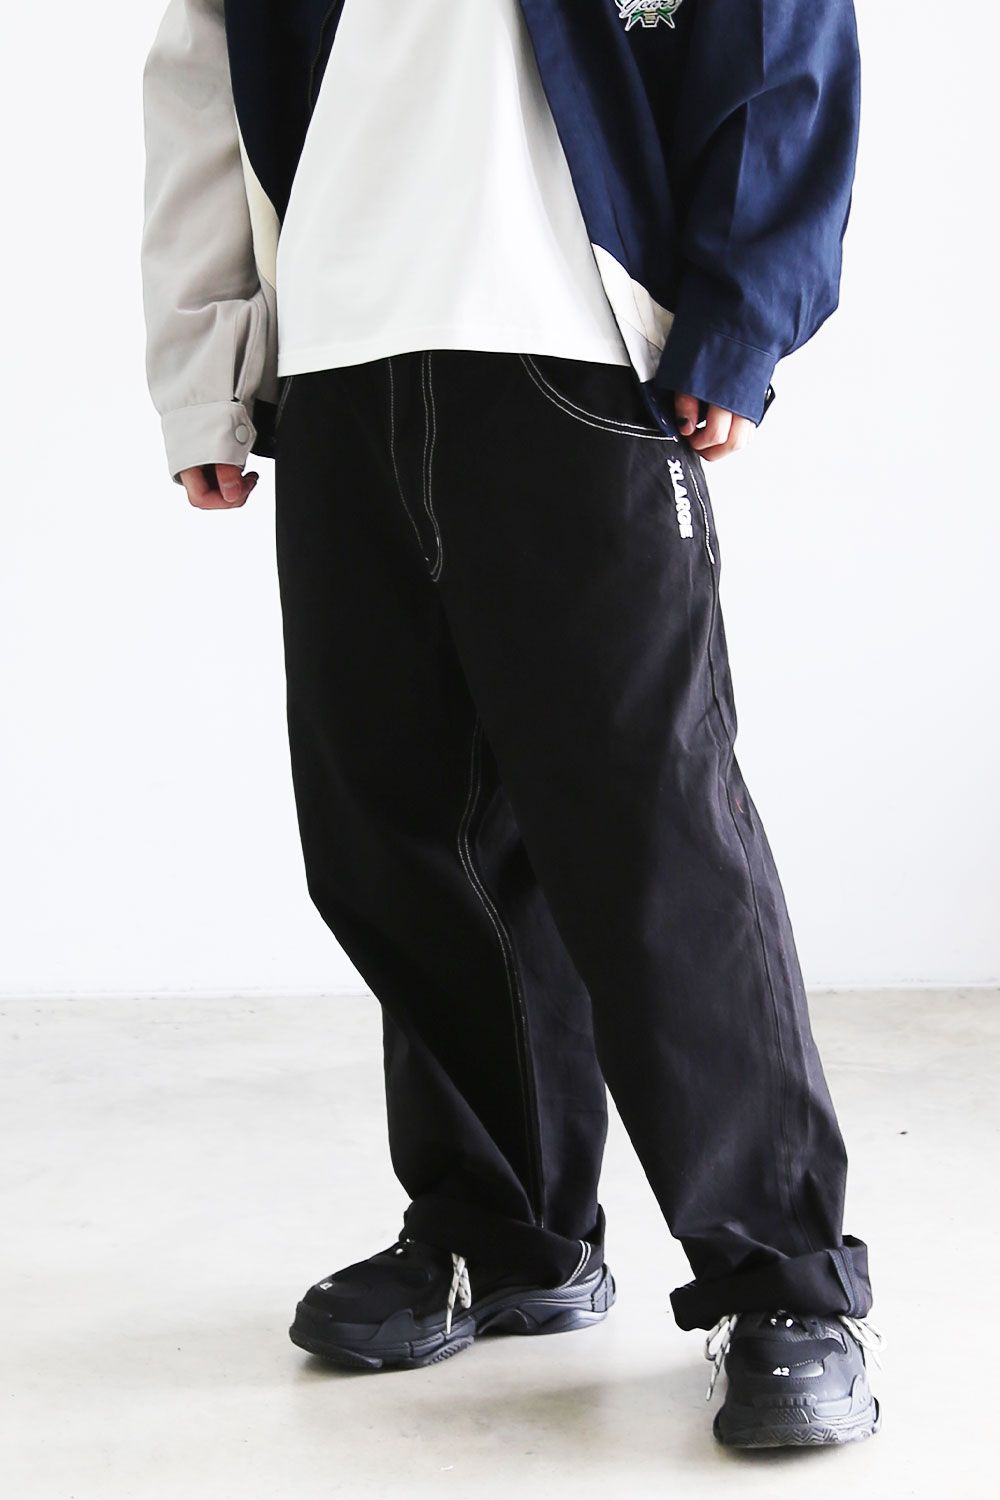 XLARGE - CONTRAST STITCH LEATHER PATCHED PANTS ...